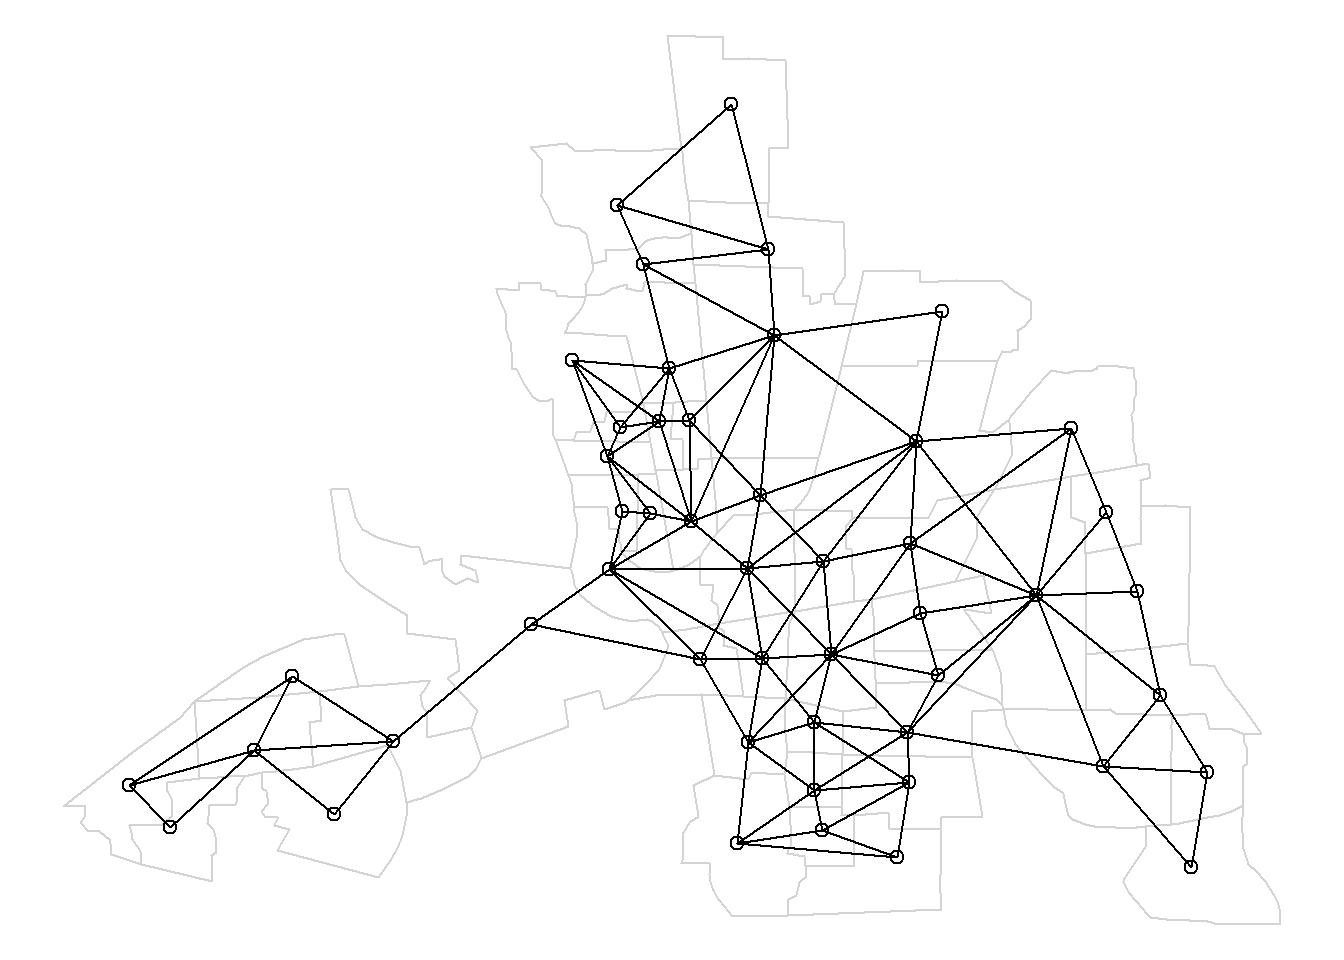 Map of neighbors based on contiguity. Neighbors of first order (left), second order (middle), and first order until second order (right).